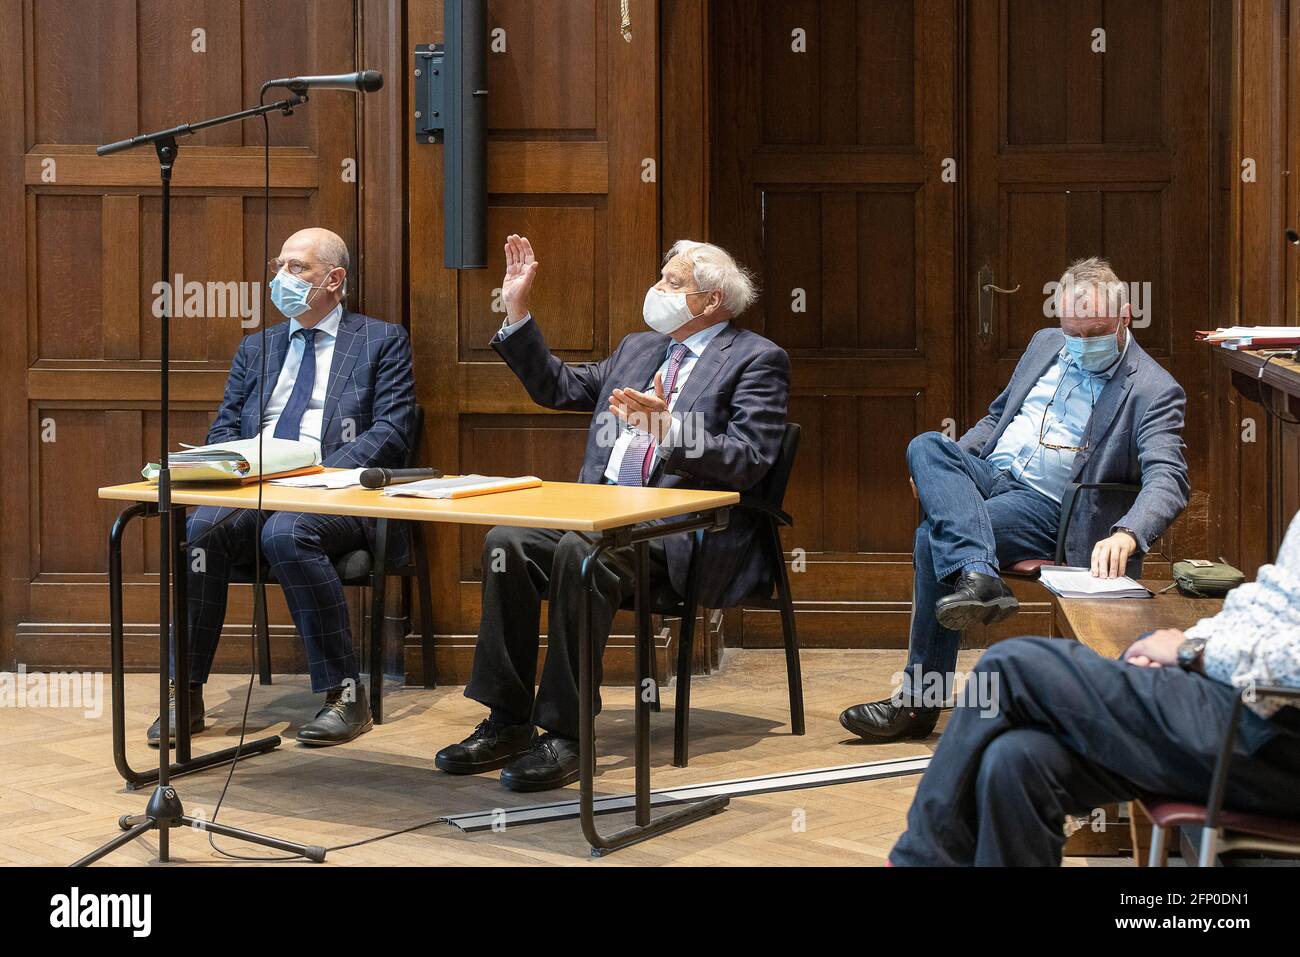 Tom Balthazar, Paul Cosyns and Werner Jacobs pictured during a session in the retrial of the doctor who euthanized Tine Nys, Thursday 20 May 2021, bef Stock Photo